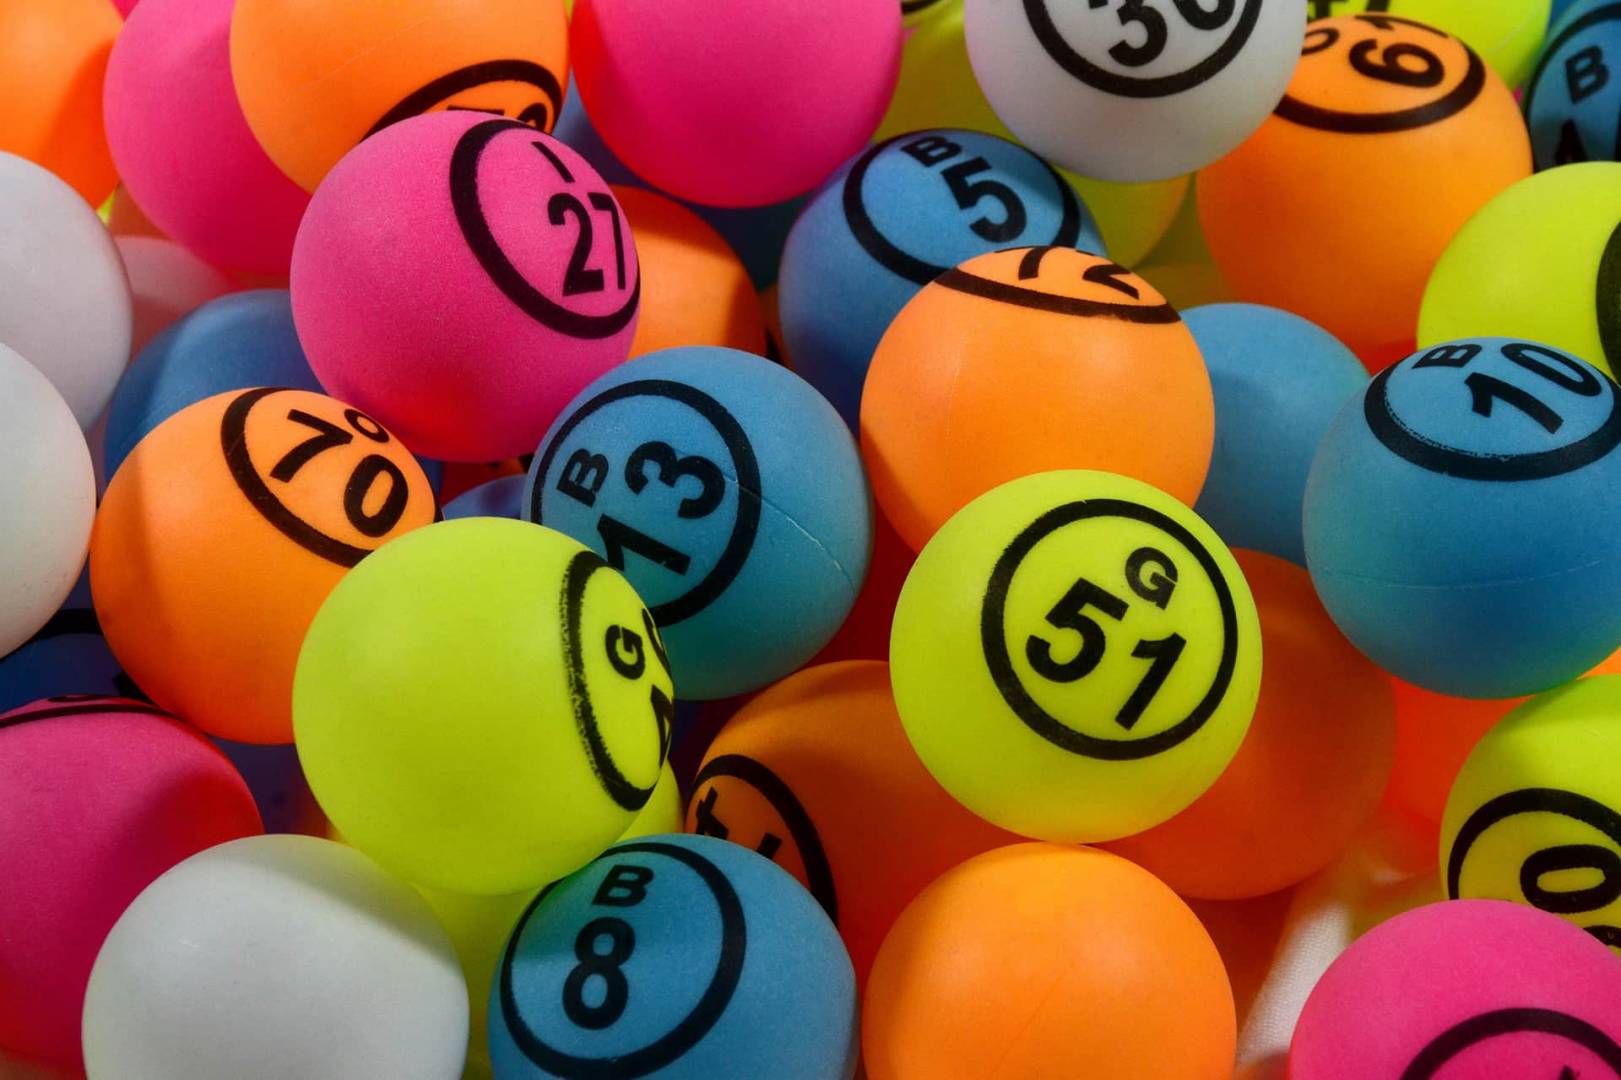 Lottstift in Norway allows online-only bingo to start up amid COVID-19